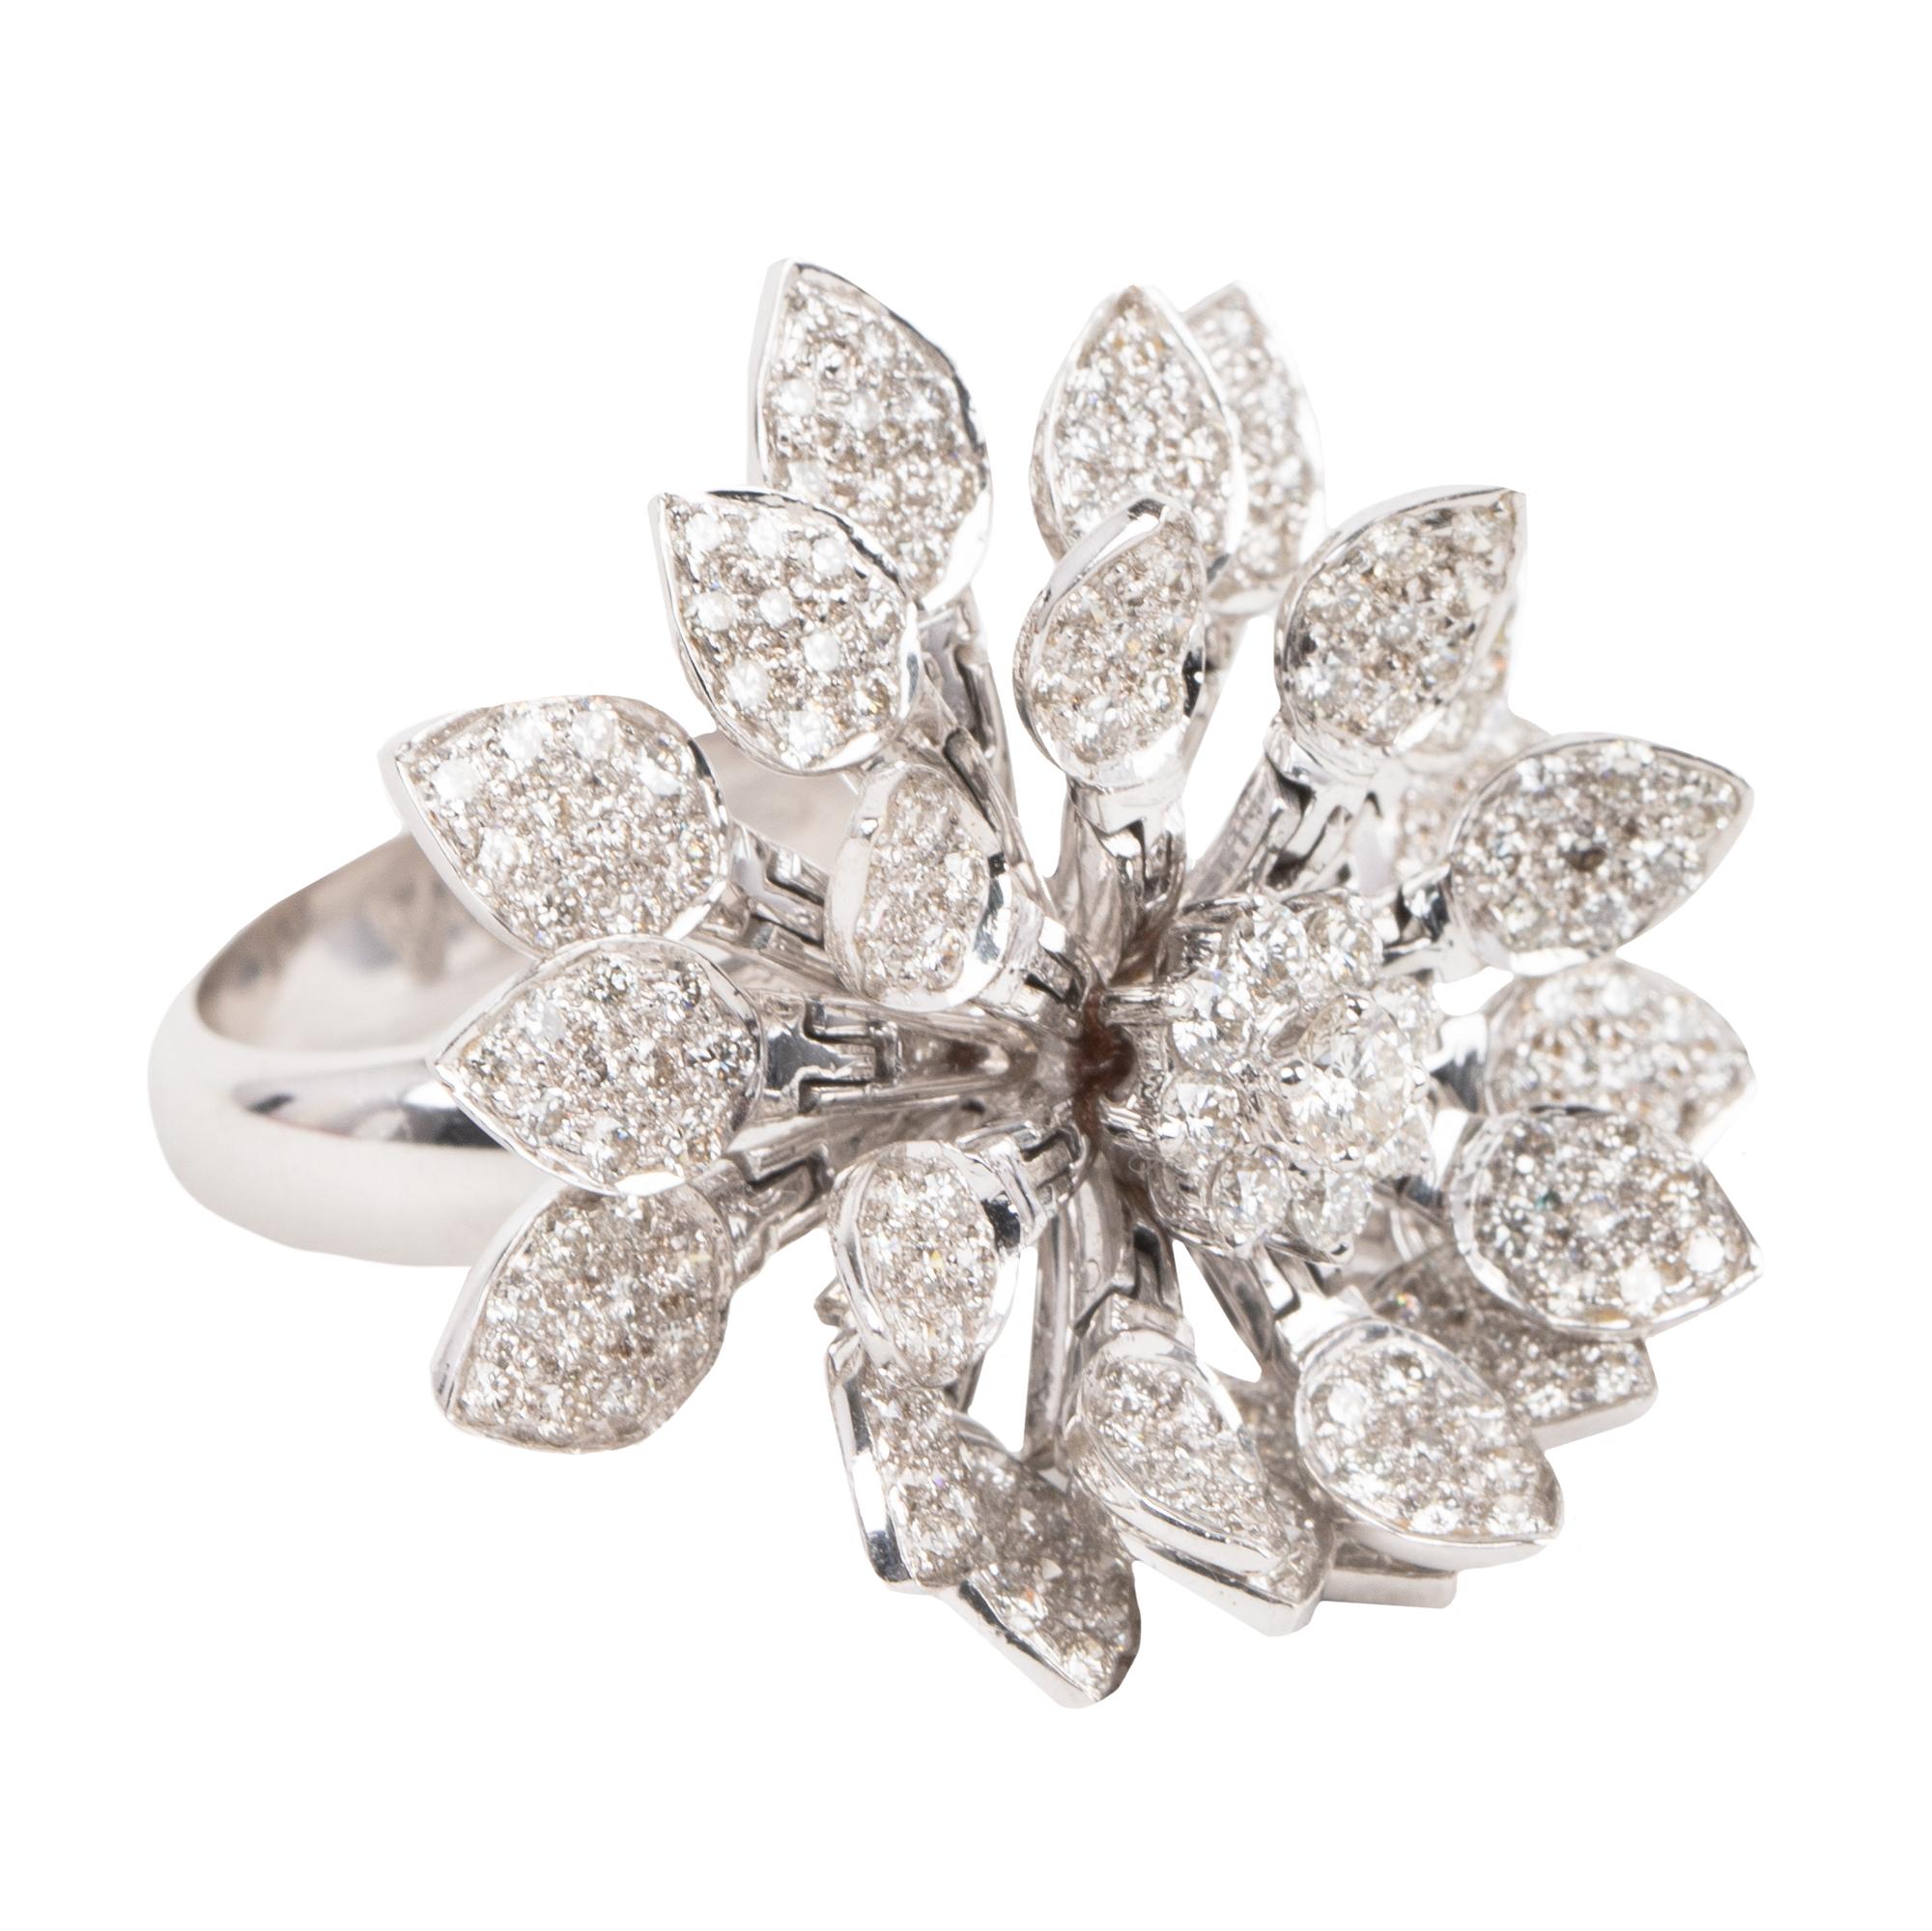 This artistic ring is a truly special work of art. The ring features diamond leaves that form a flower. With any hand movement, the leaves move to represent flowers blooming. Anyone who wears this ring is sure to turn heads as it is a statement